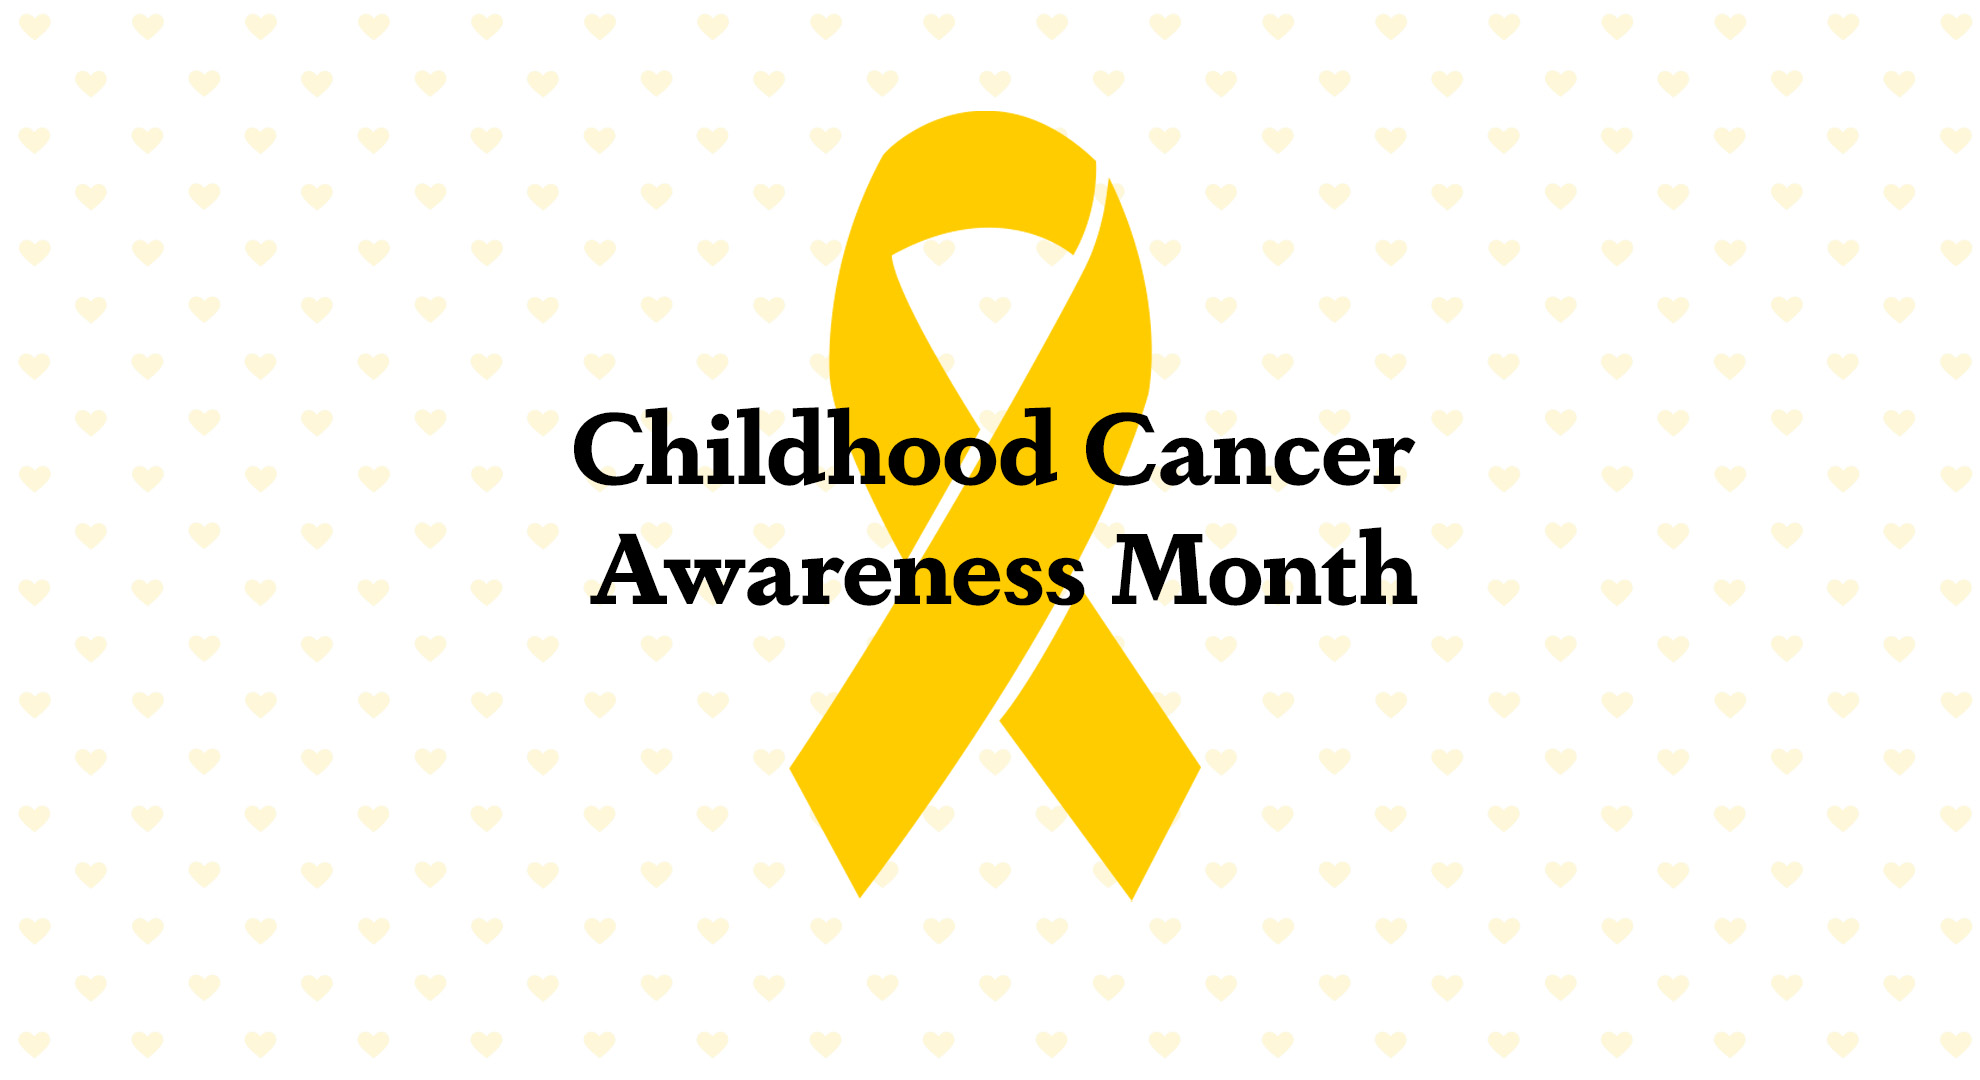 White with pale yellow heart pattern background. A singular yellow ribbon in the center. Black serif letters overtop ribbon read Childhood Cancer Awareness Month.